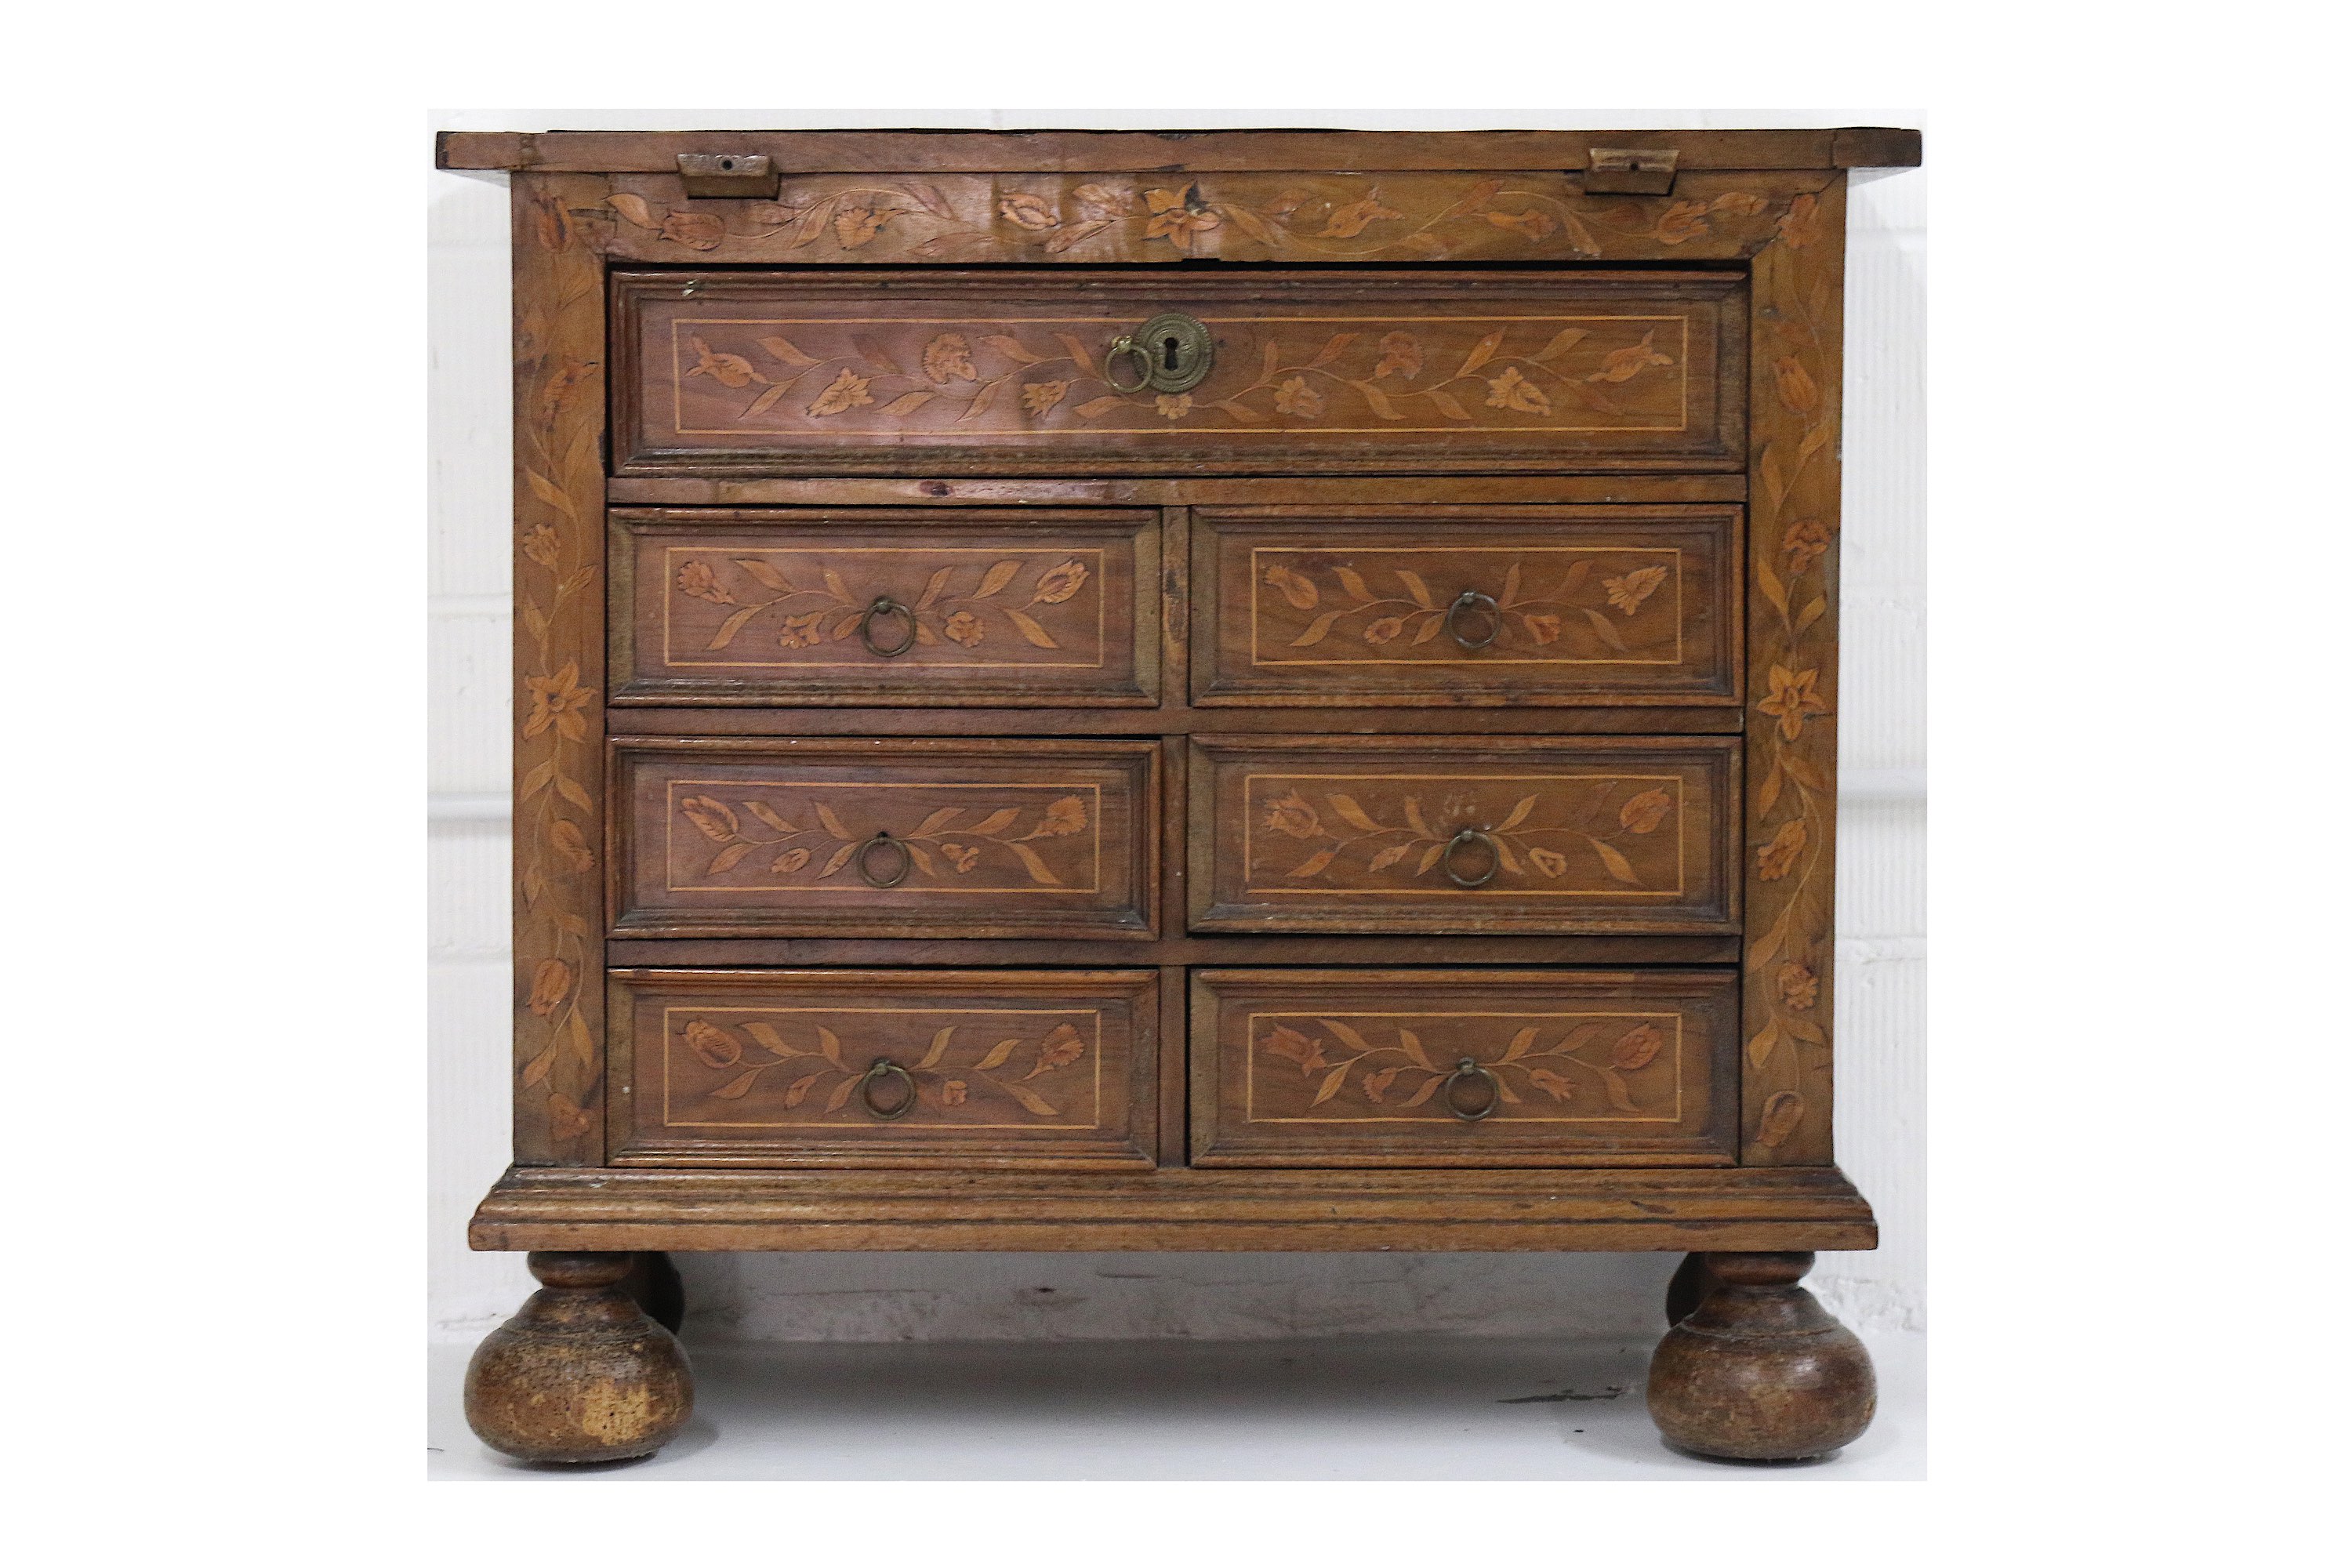 A small 18th Century Dutch walnut and floral marquetry inlaid chest, formerly a Bachelors chest, the